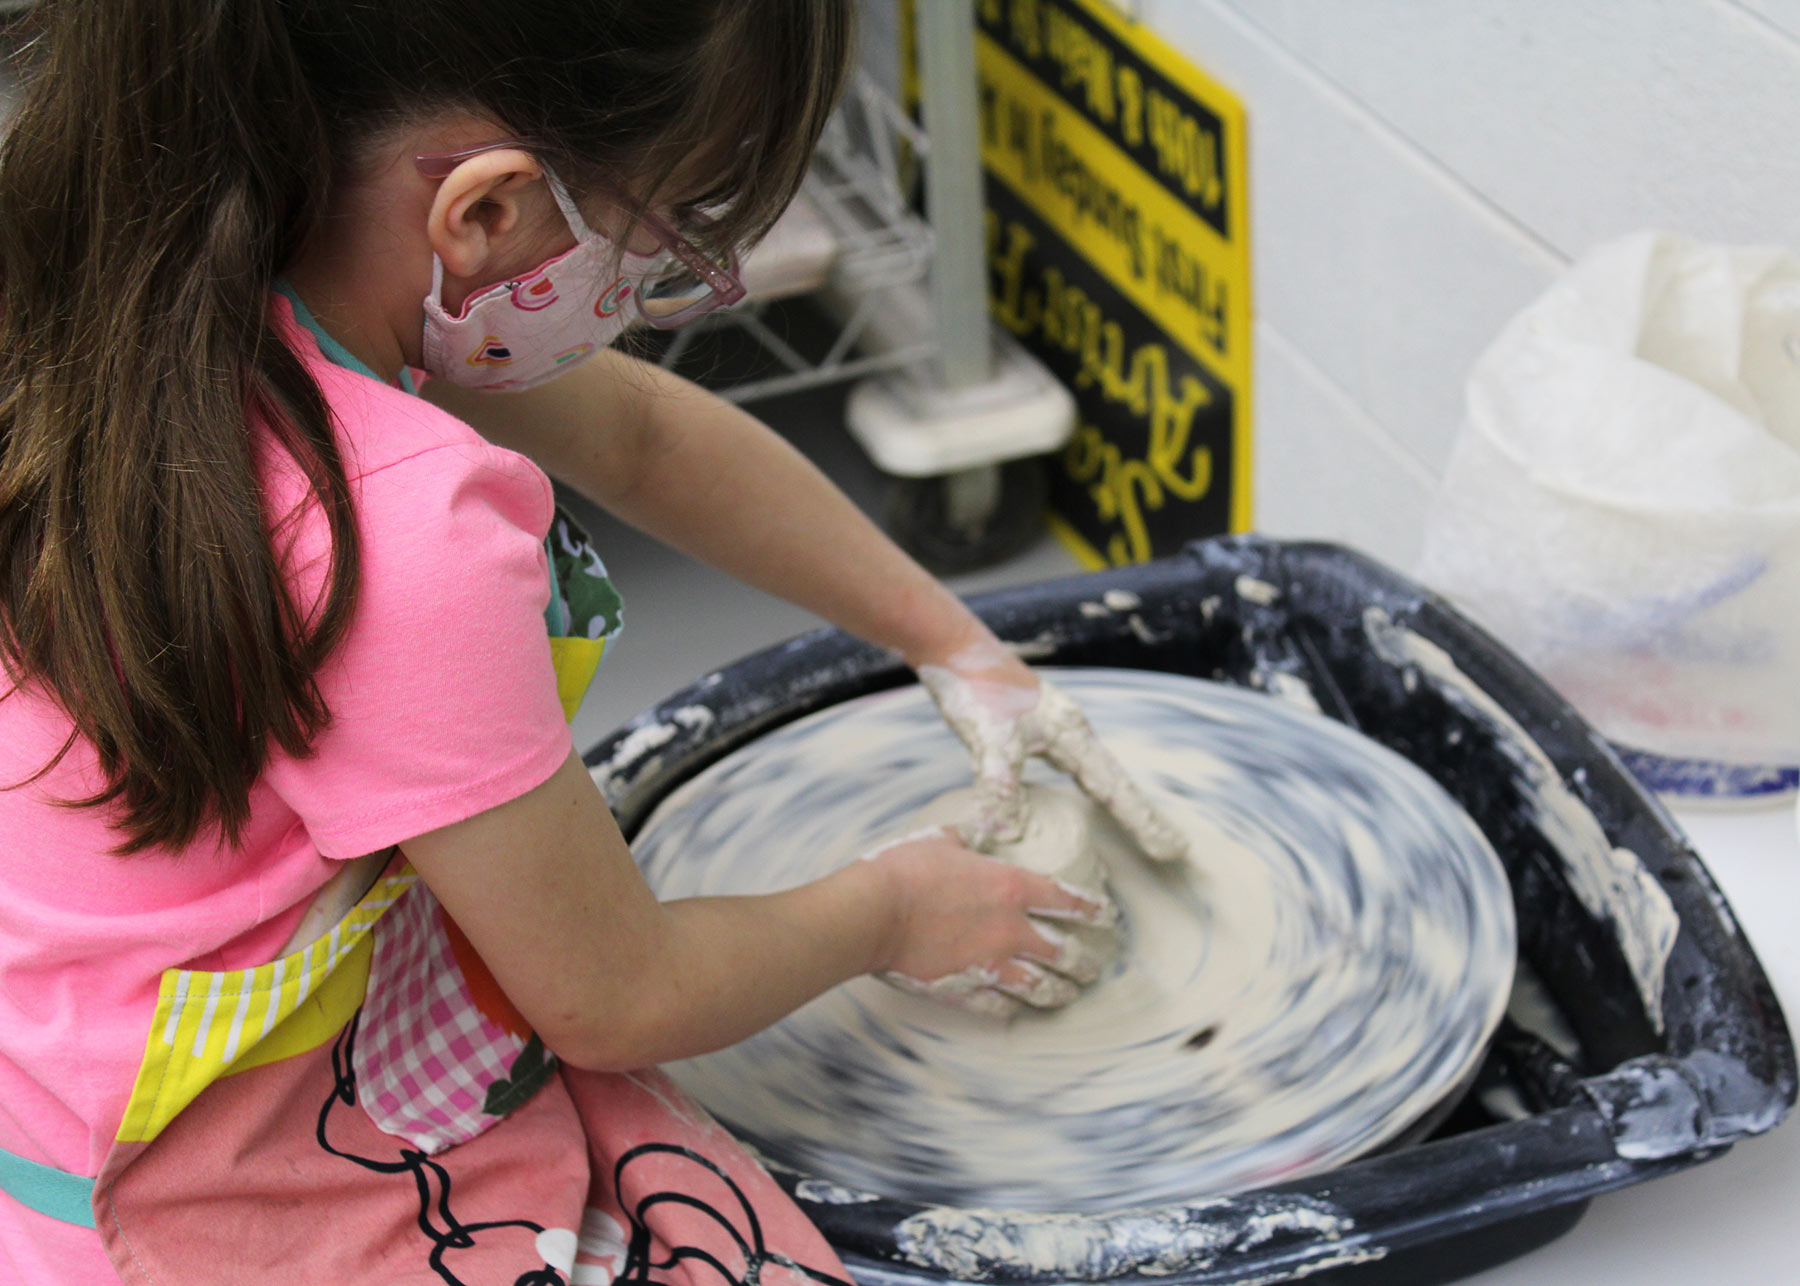 A young child with a pink shirt and face mask is pushing down in a round piece of clay on a potter's wheel.